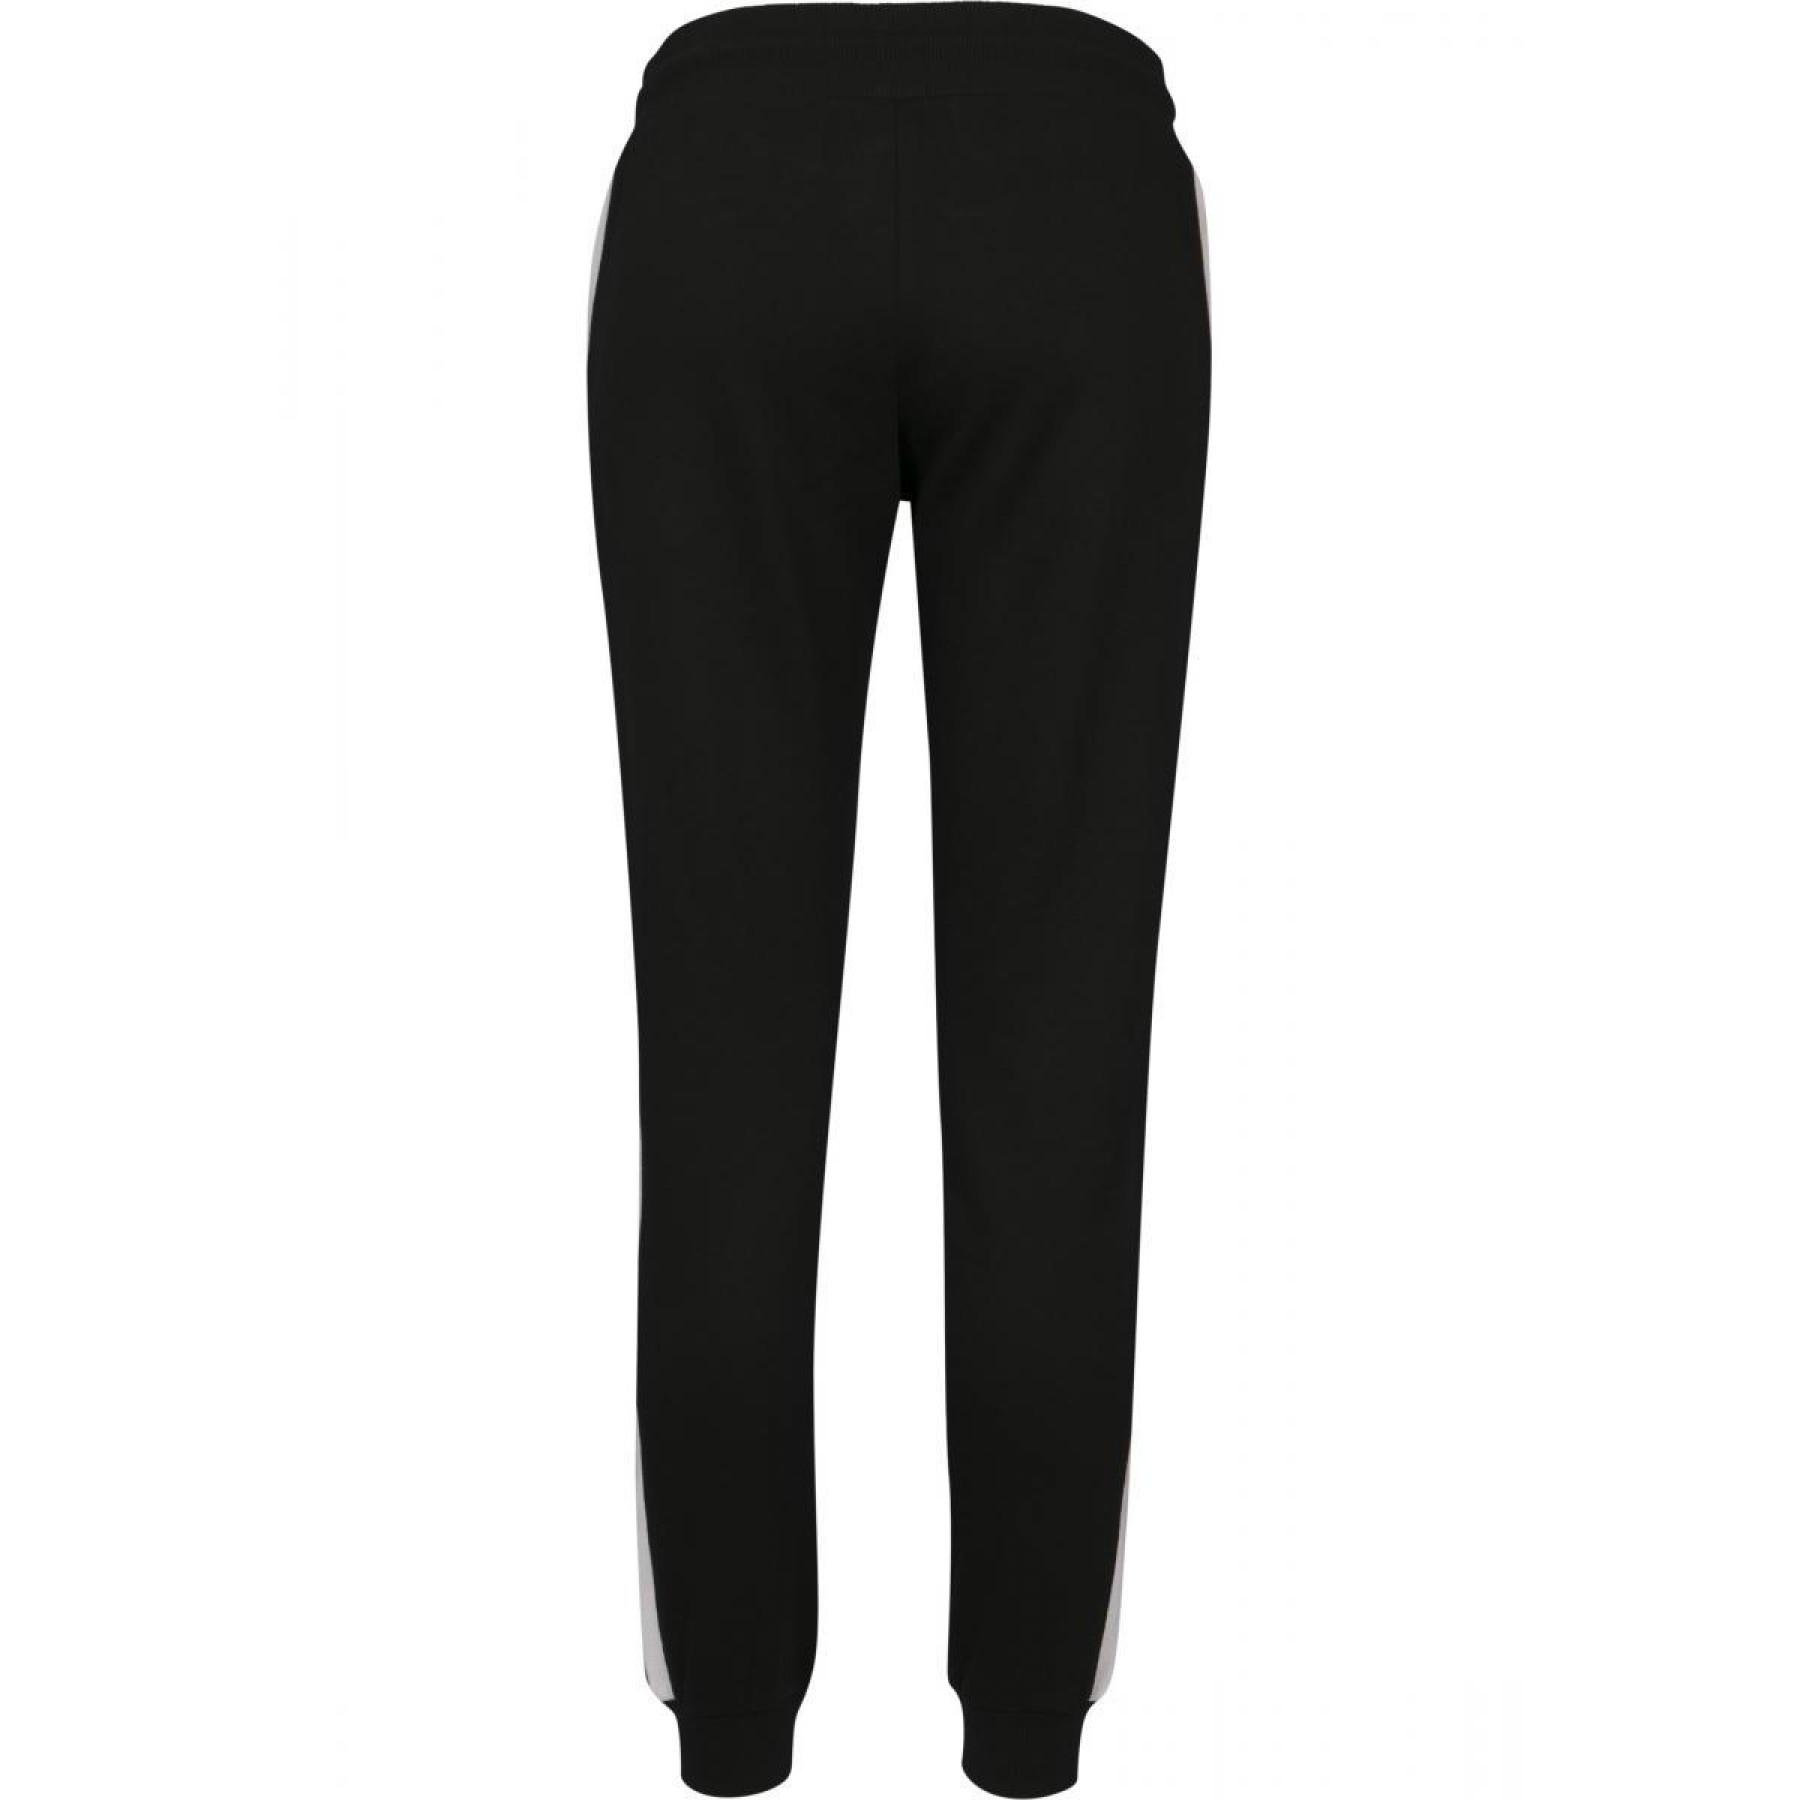 Pant donna Urban Classic college contrasto GT